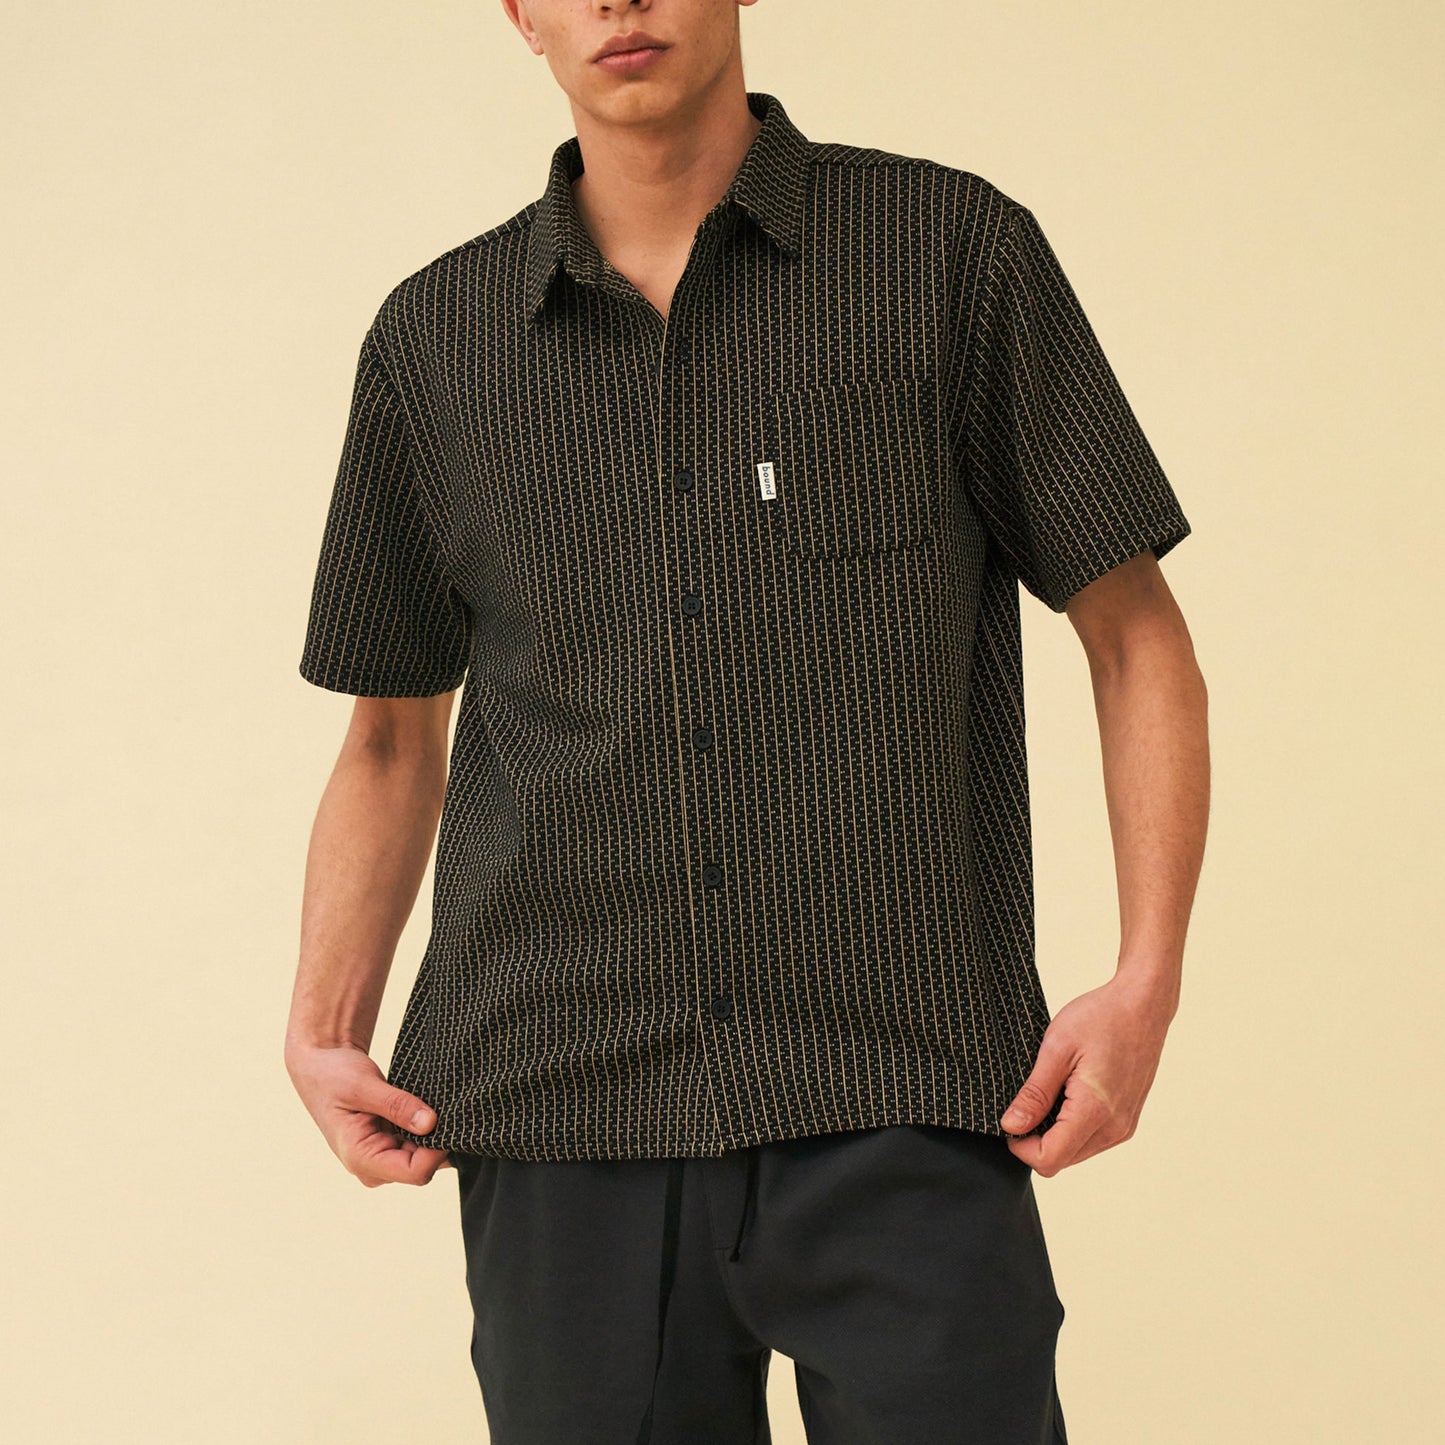 bound 'Oscuro' Patterned Textured Polo Shirt - Black